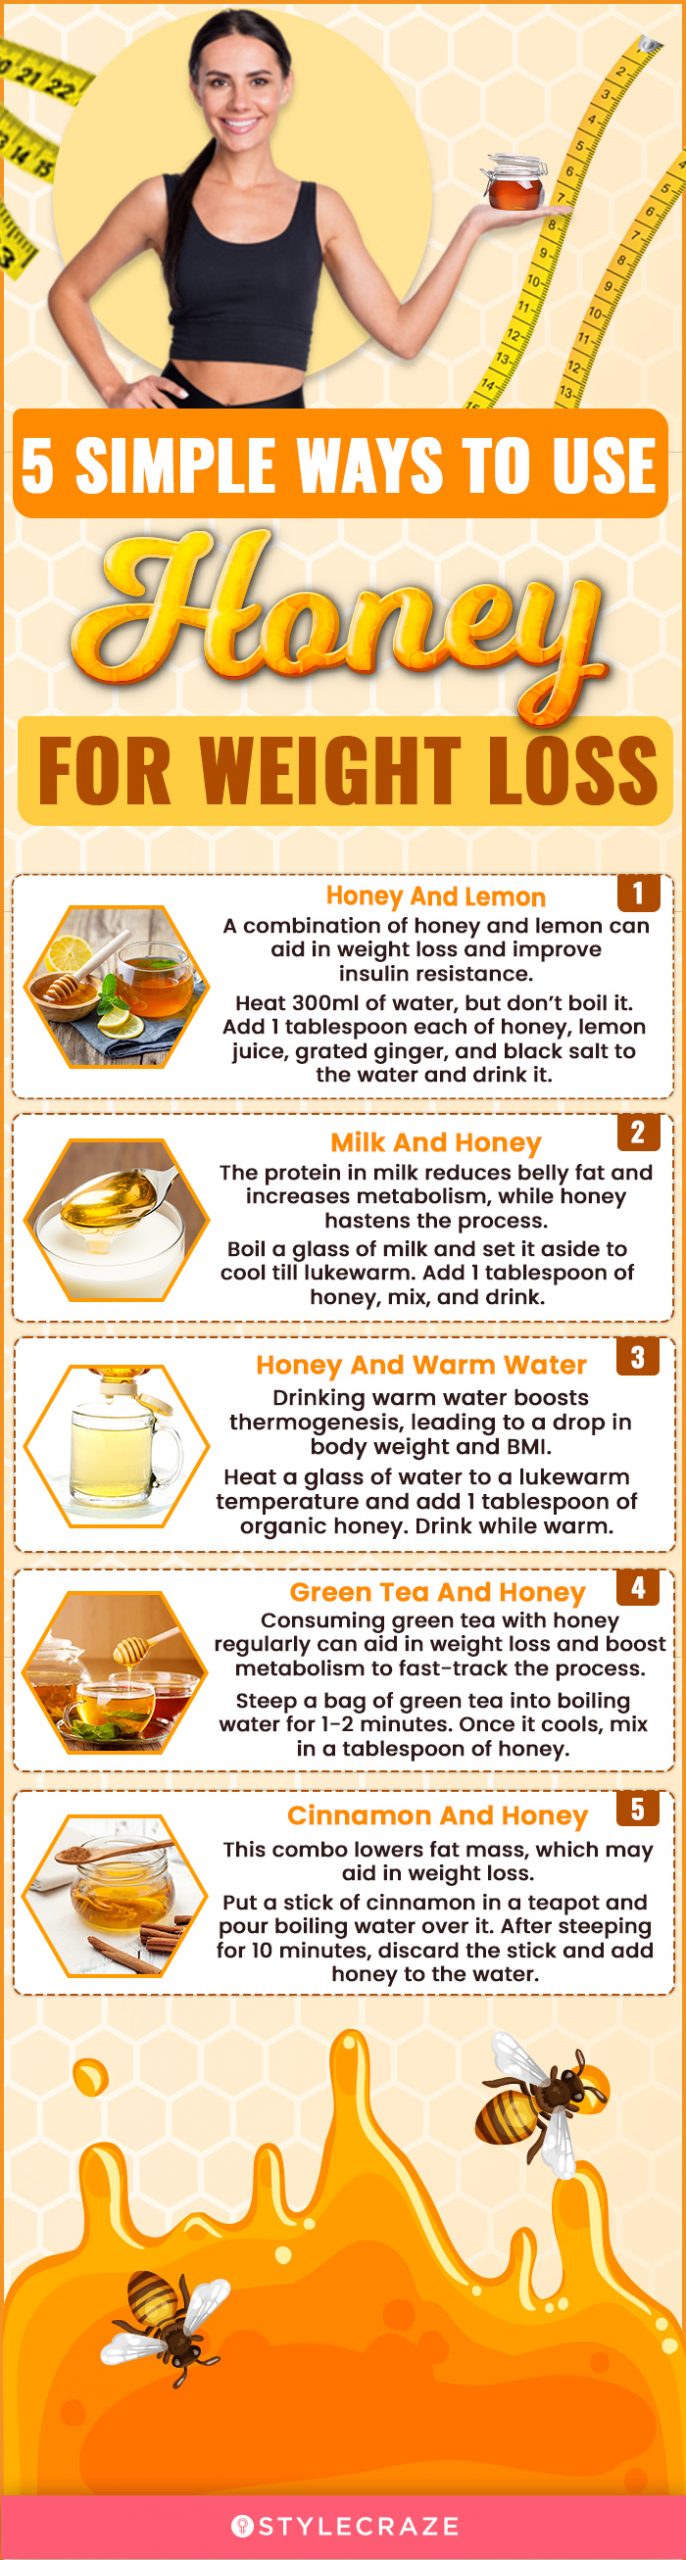 5 simple ways to use honey for weight loss (infographic)